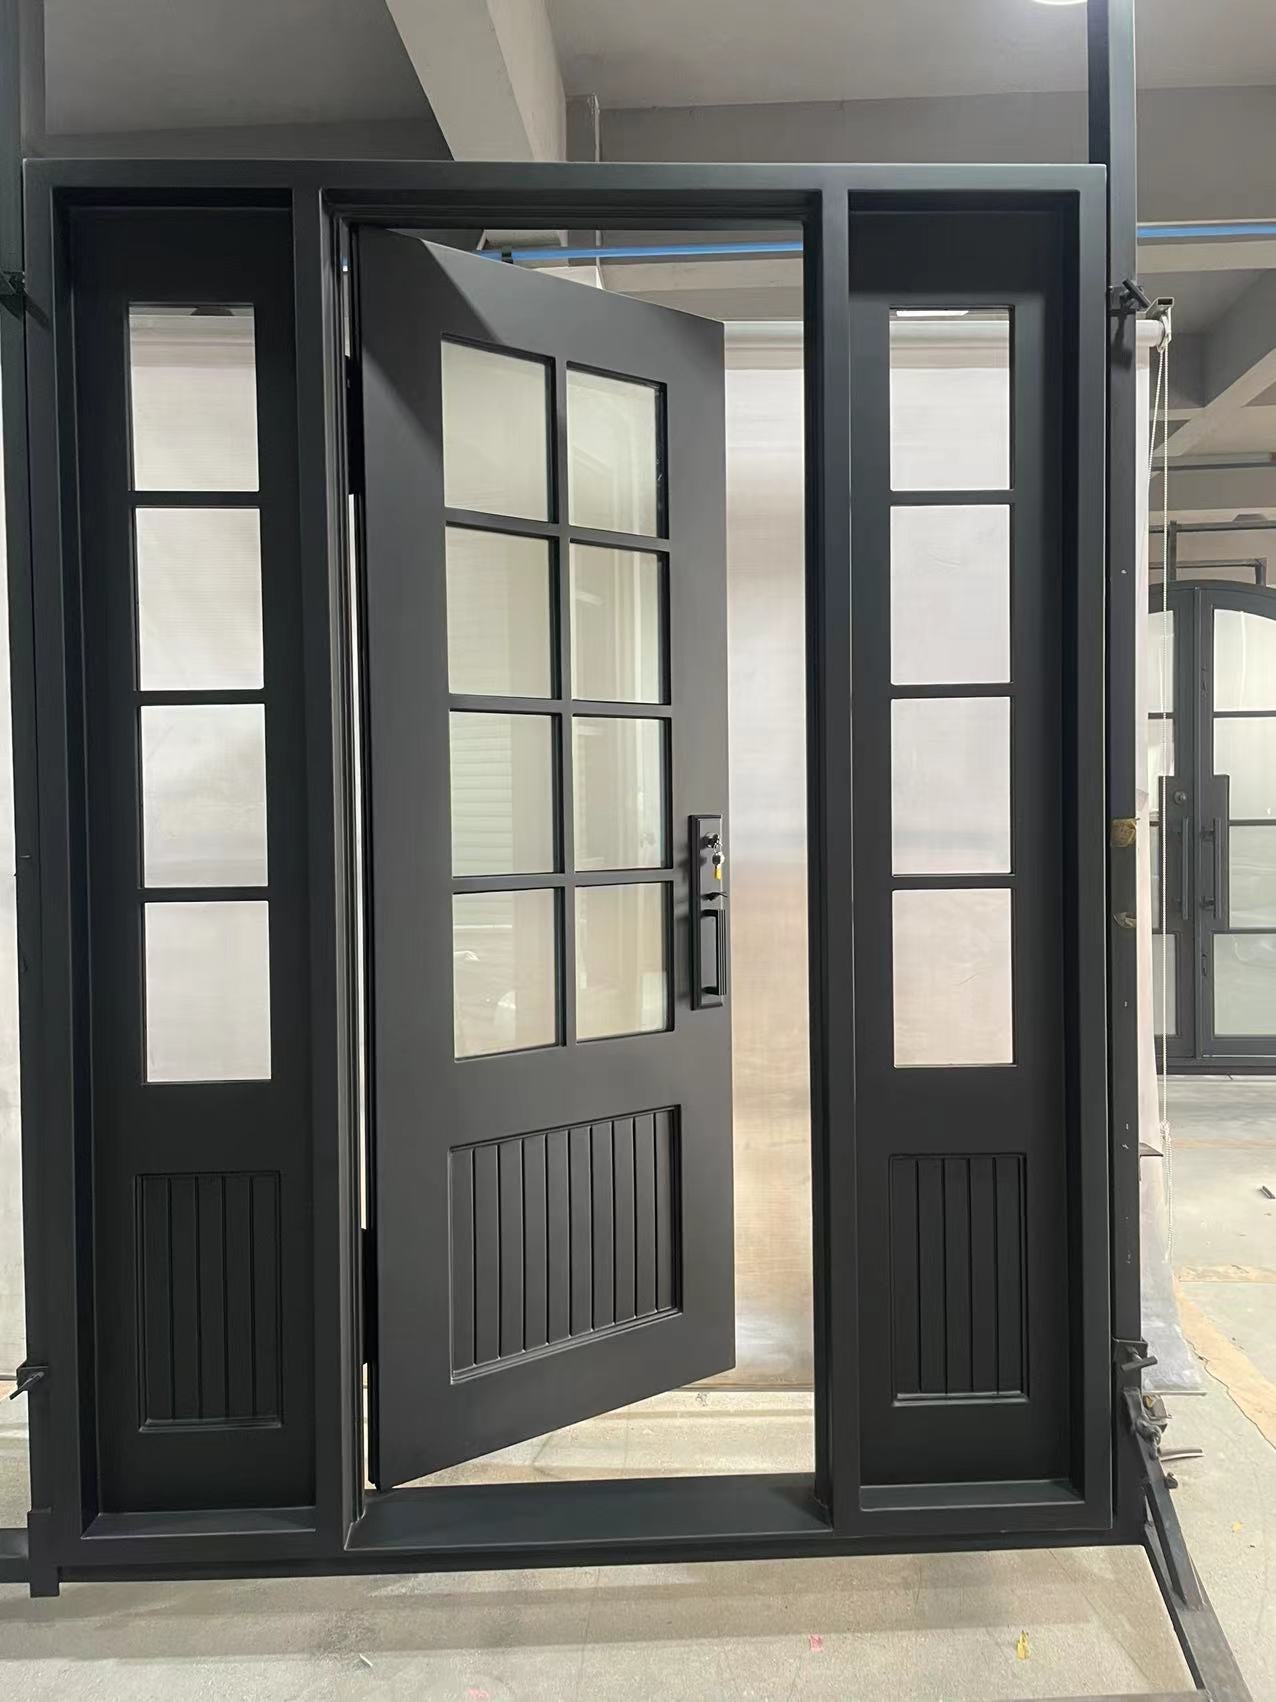 gloryirondoors iron single front doors with two sidelights in matte black color